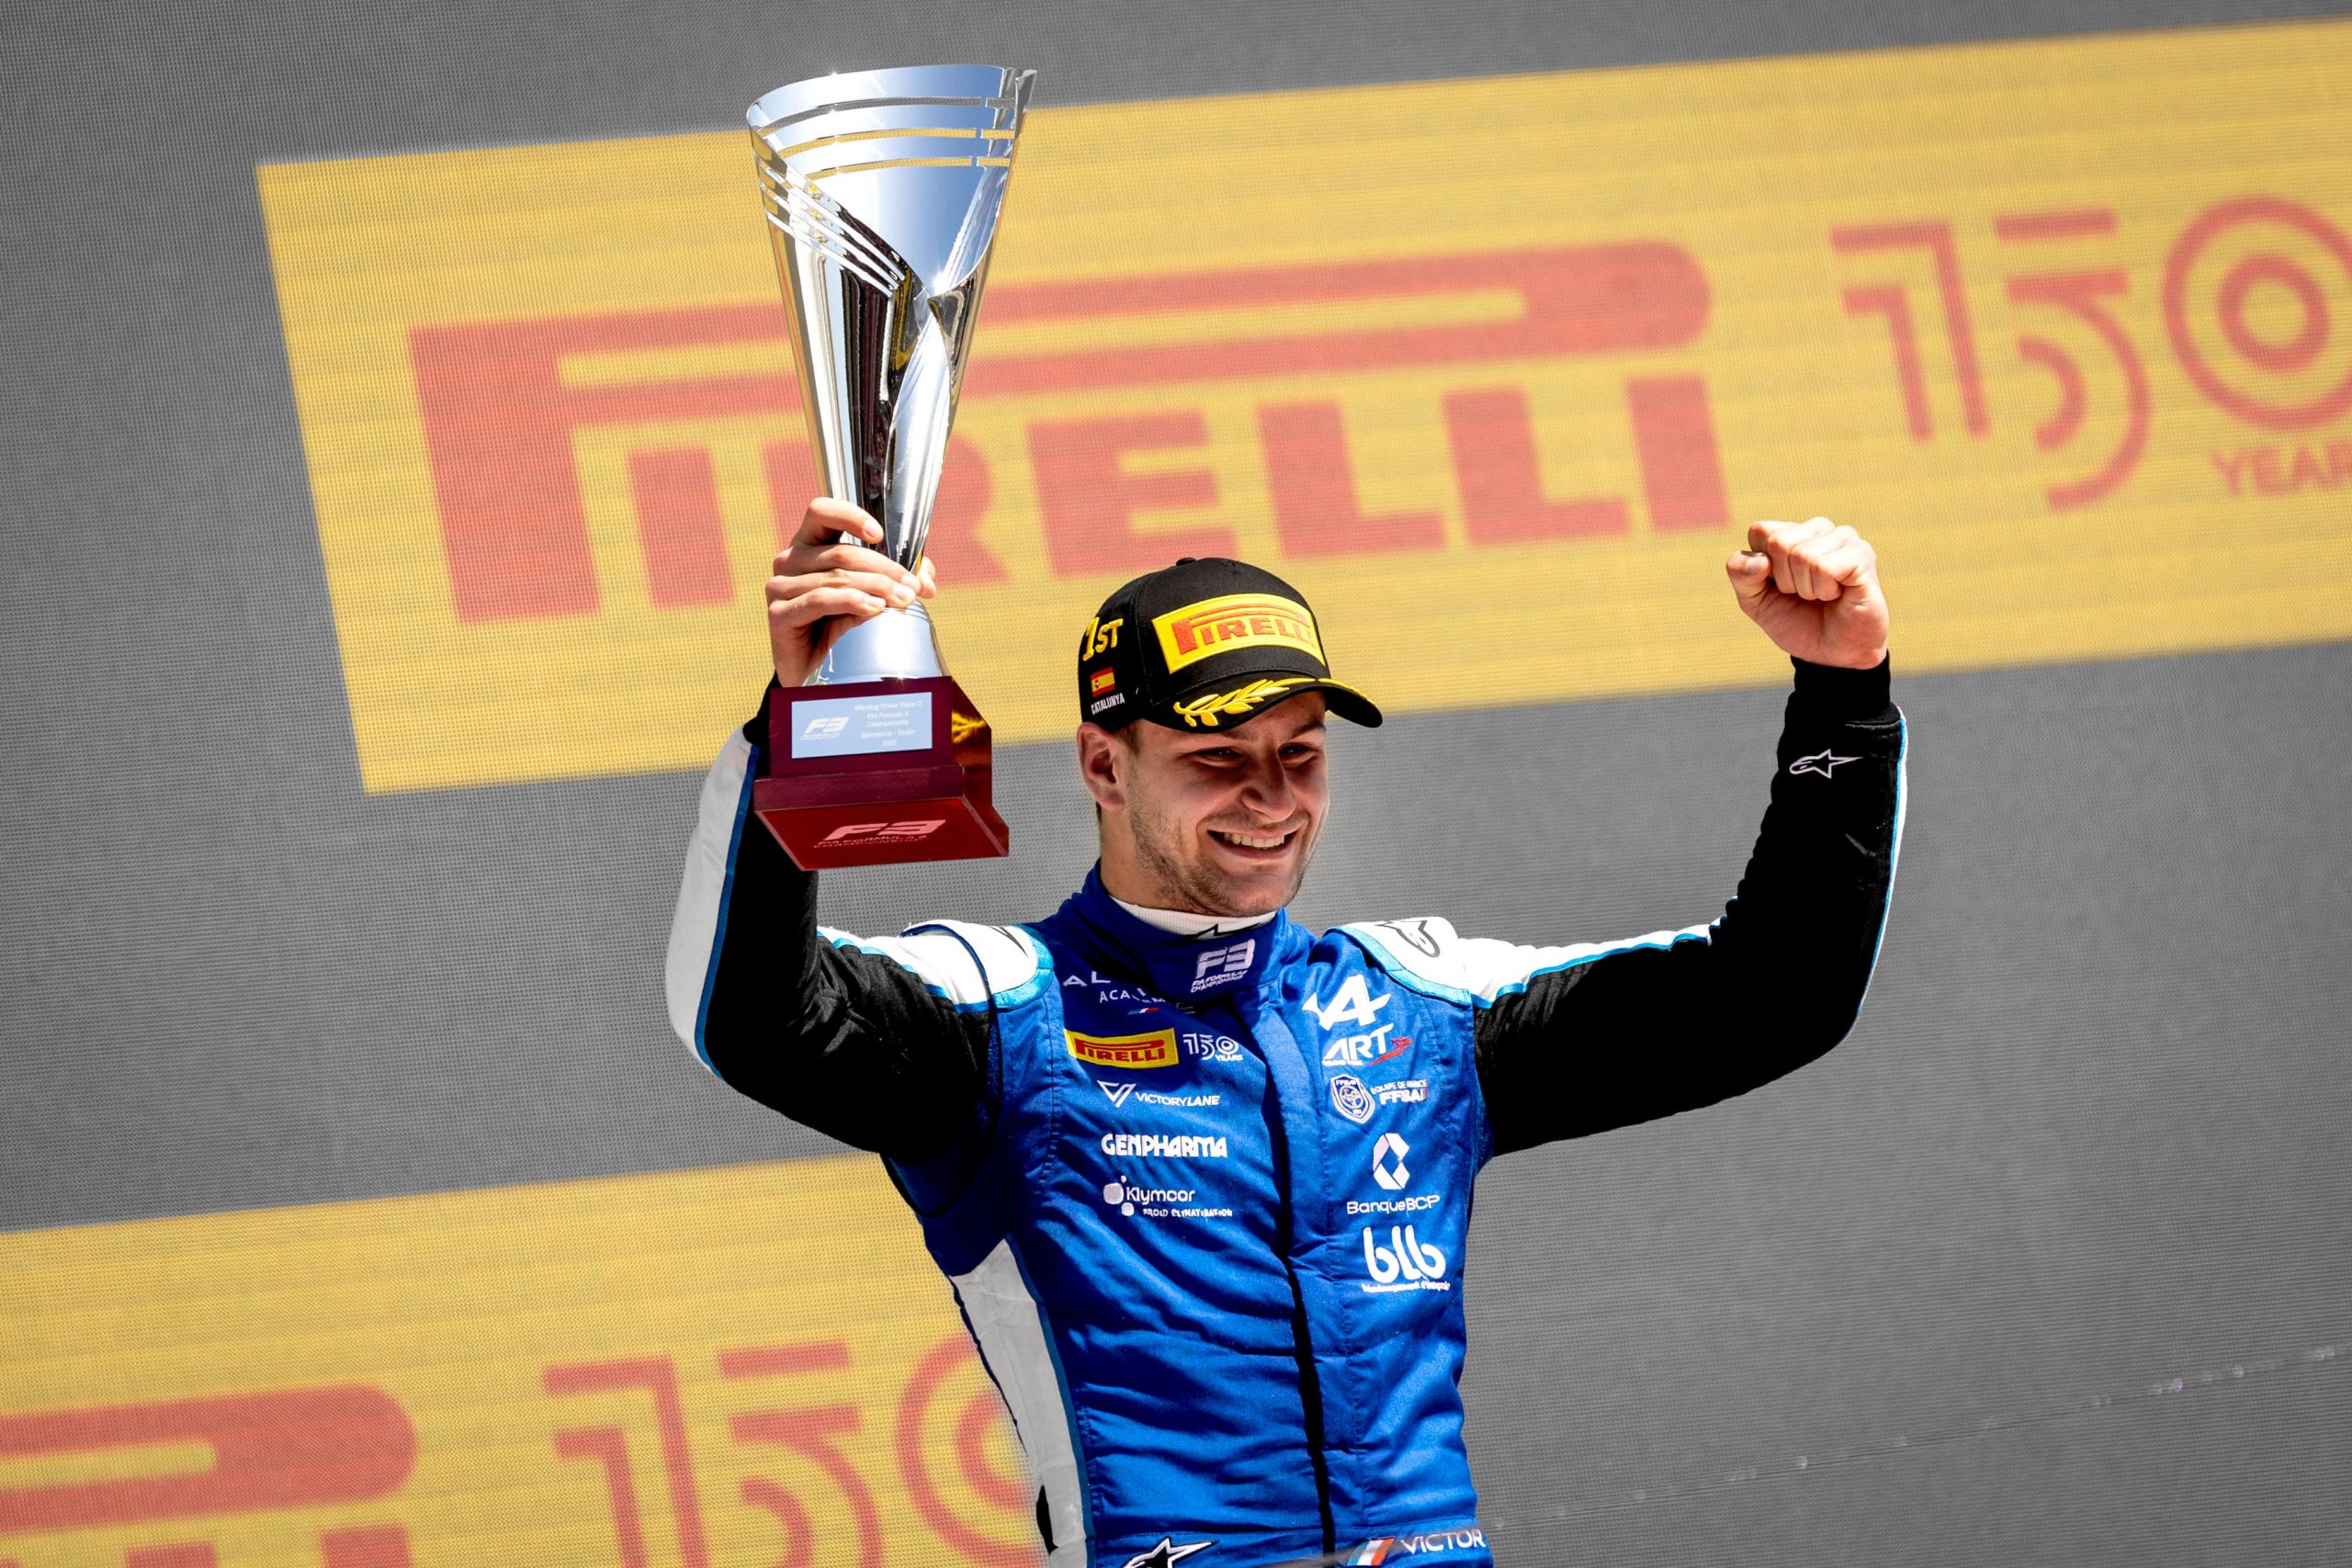 Victor Martins takes his second win of the season